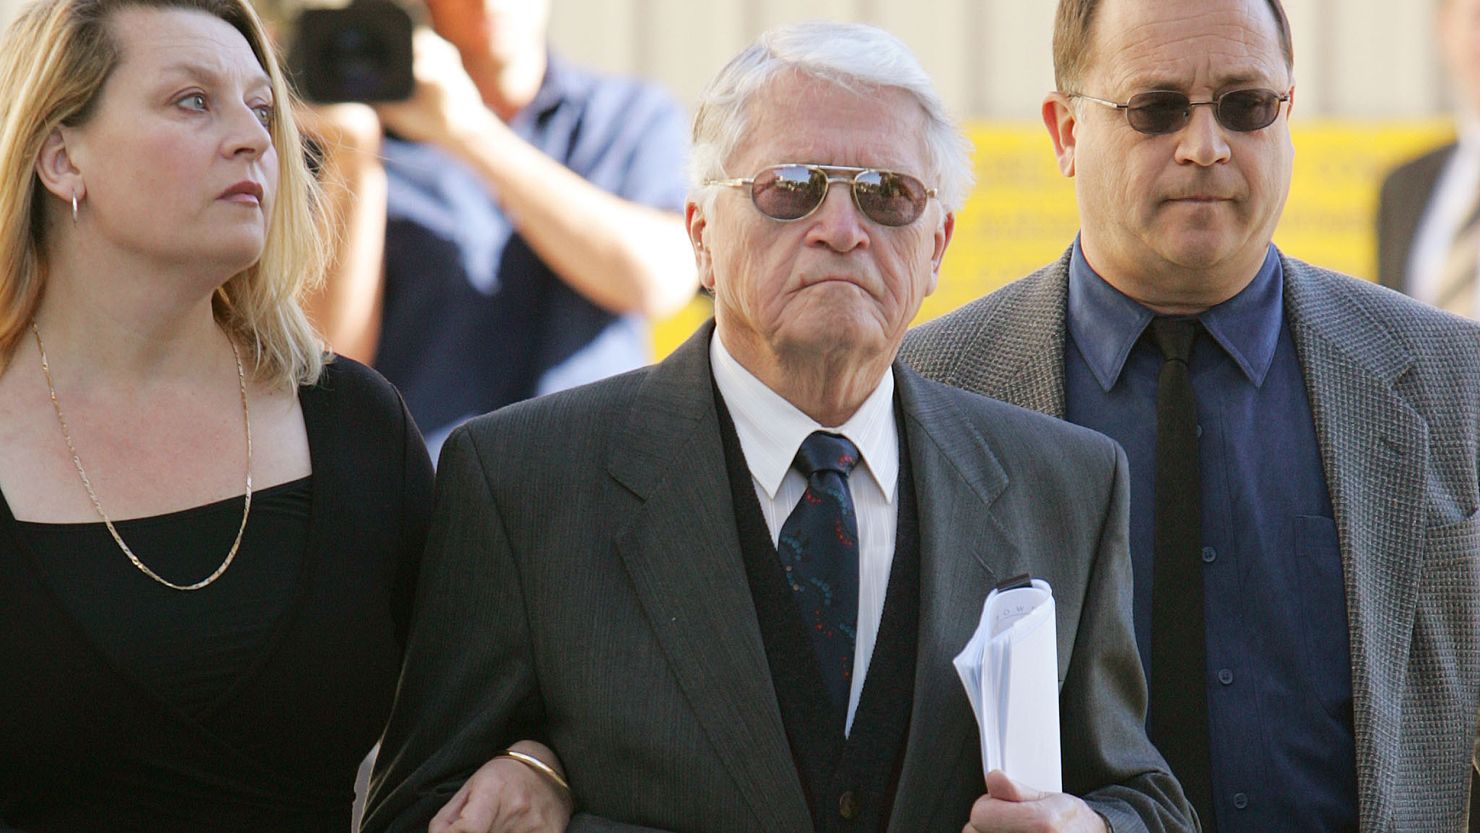 Alleged WWII war criminal Charles Zentai (C) leaves an extradition proceeding on July 19, 2005.